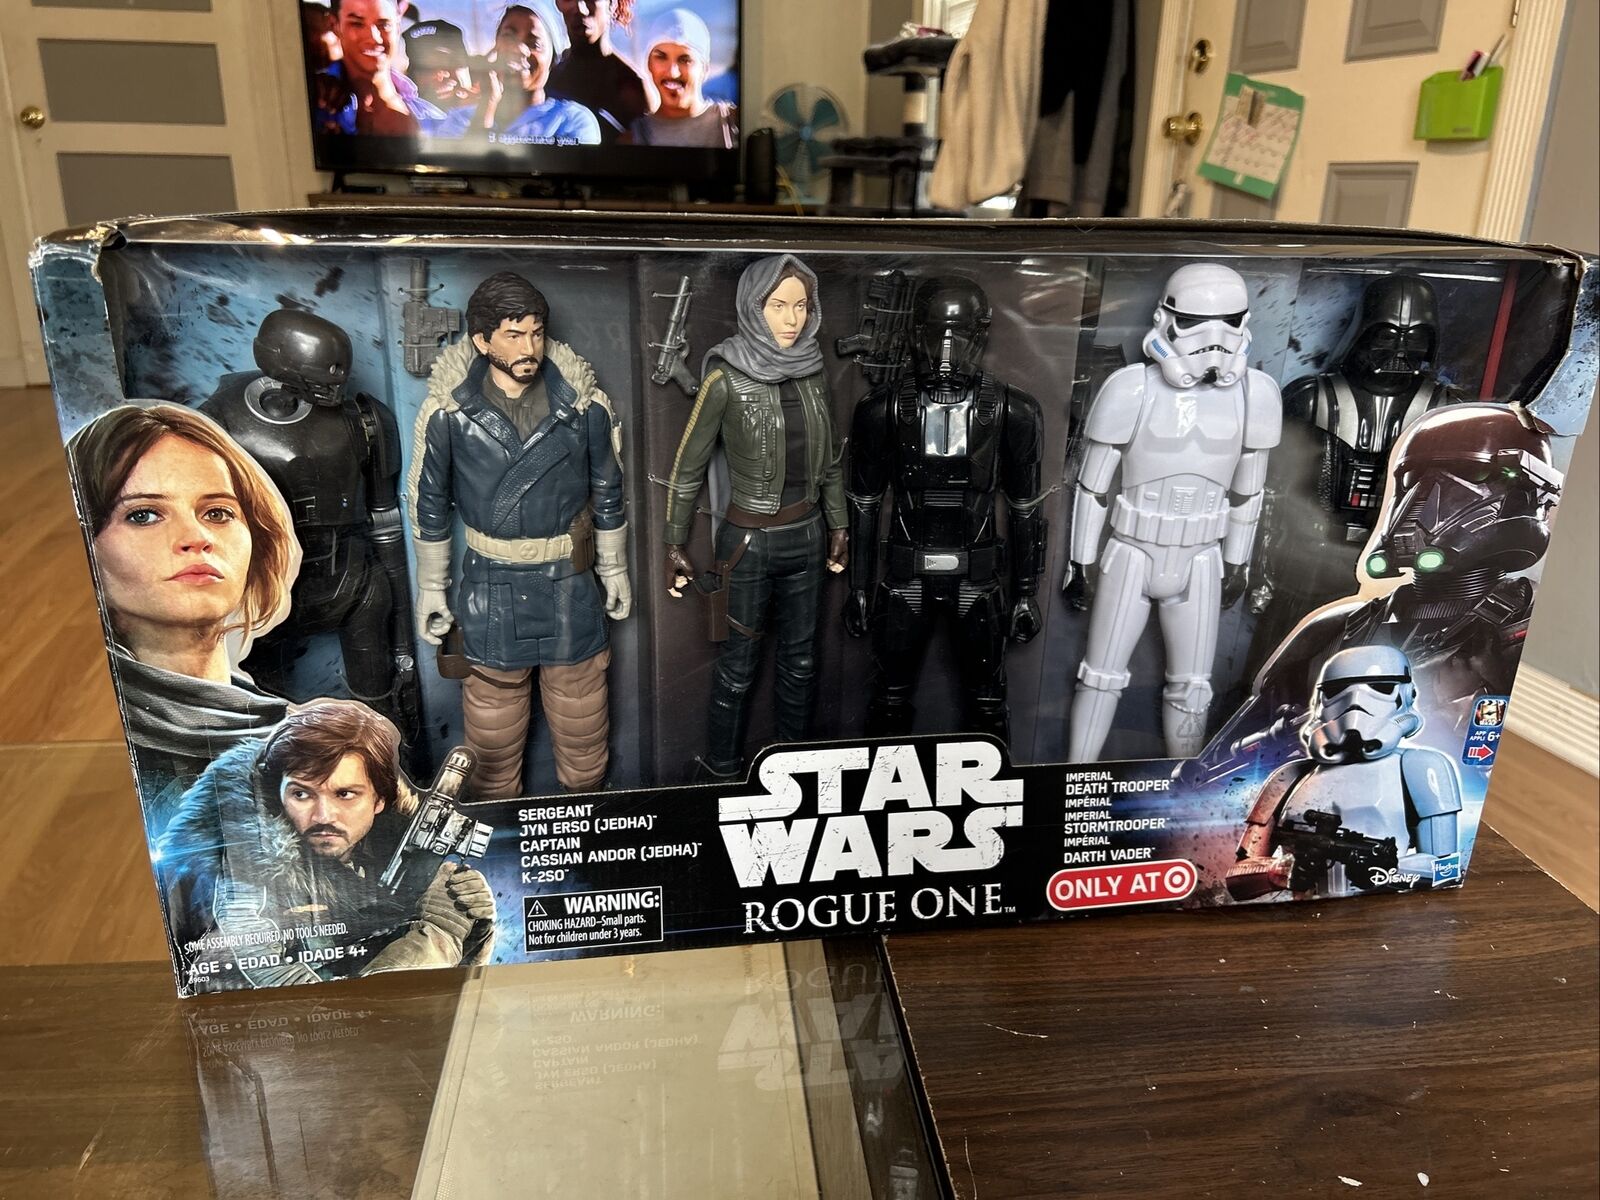 STAR WARS ROGUE ONE 2016 TARGET EXCLUSIVE SET OF 6 12" INCH COLLECTIBLE FIGURES 